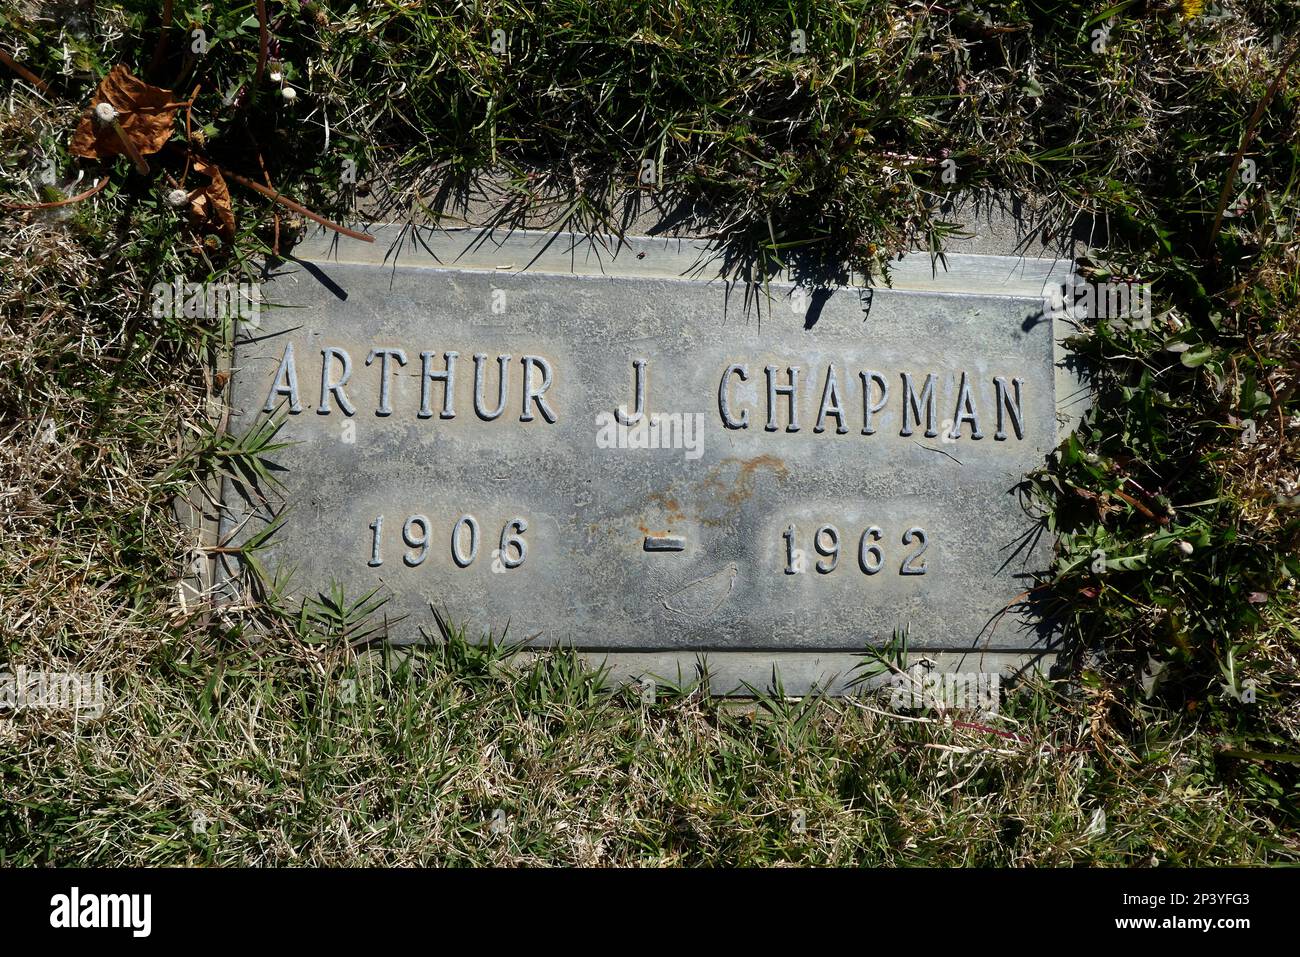 Long Beach, California, USA 2nd March 2023 Professional Hockey Player Art Chapman's Grave in Bouvardia section at Forest Lawn Long Beach Memorial Park Cemetery on March 2, 2023 in Long Beach, California, USA. Photo by Barry King/Alamy Stock Photo Stock Photo